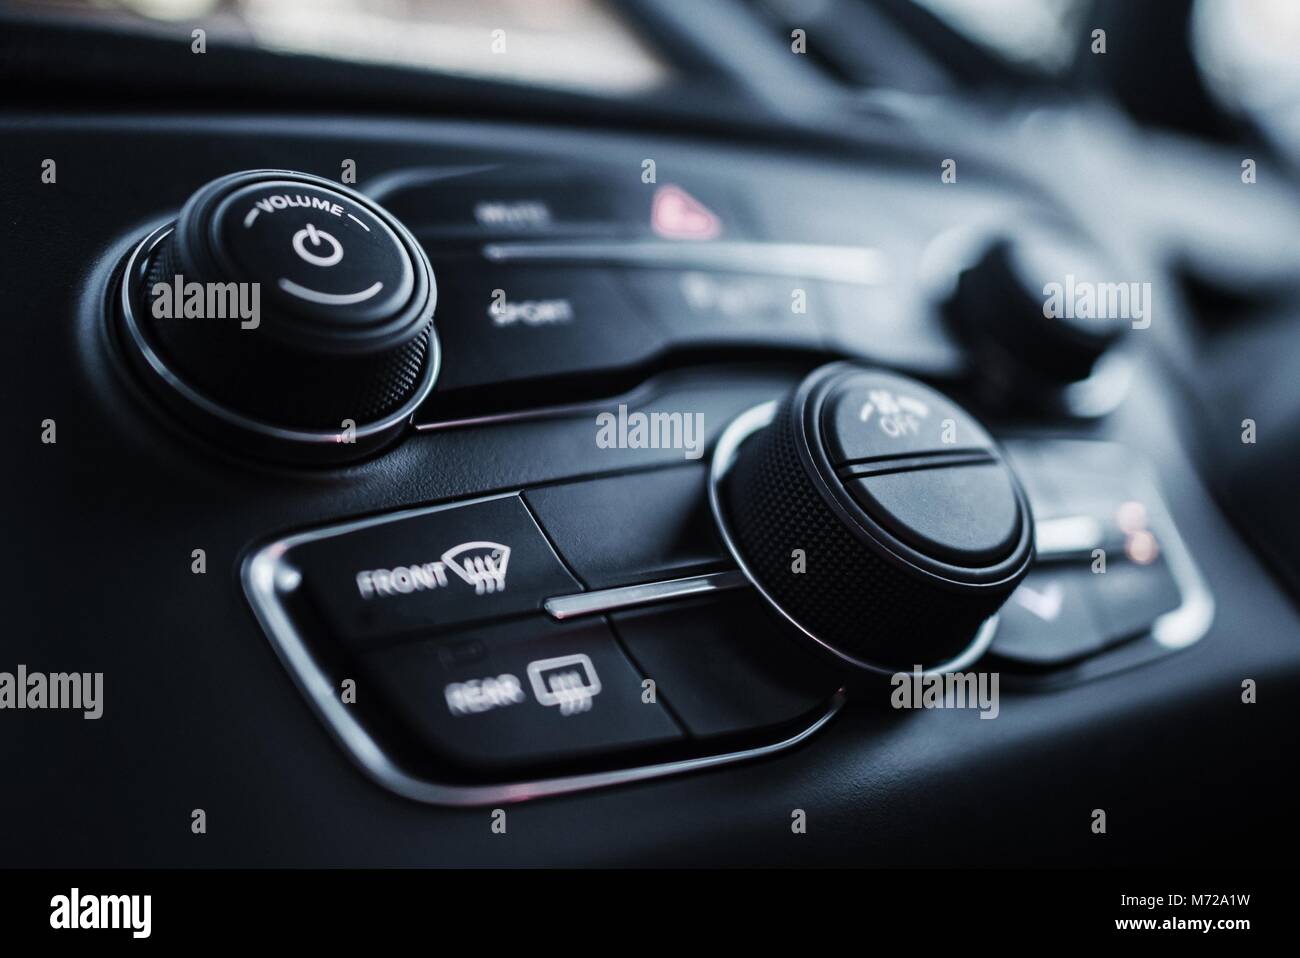 Car Dashboard Instruments Closeup Photo. Multimedia and Climate Control Buttons. Stock Photo